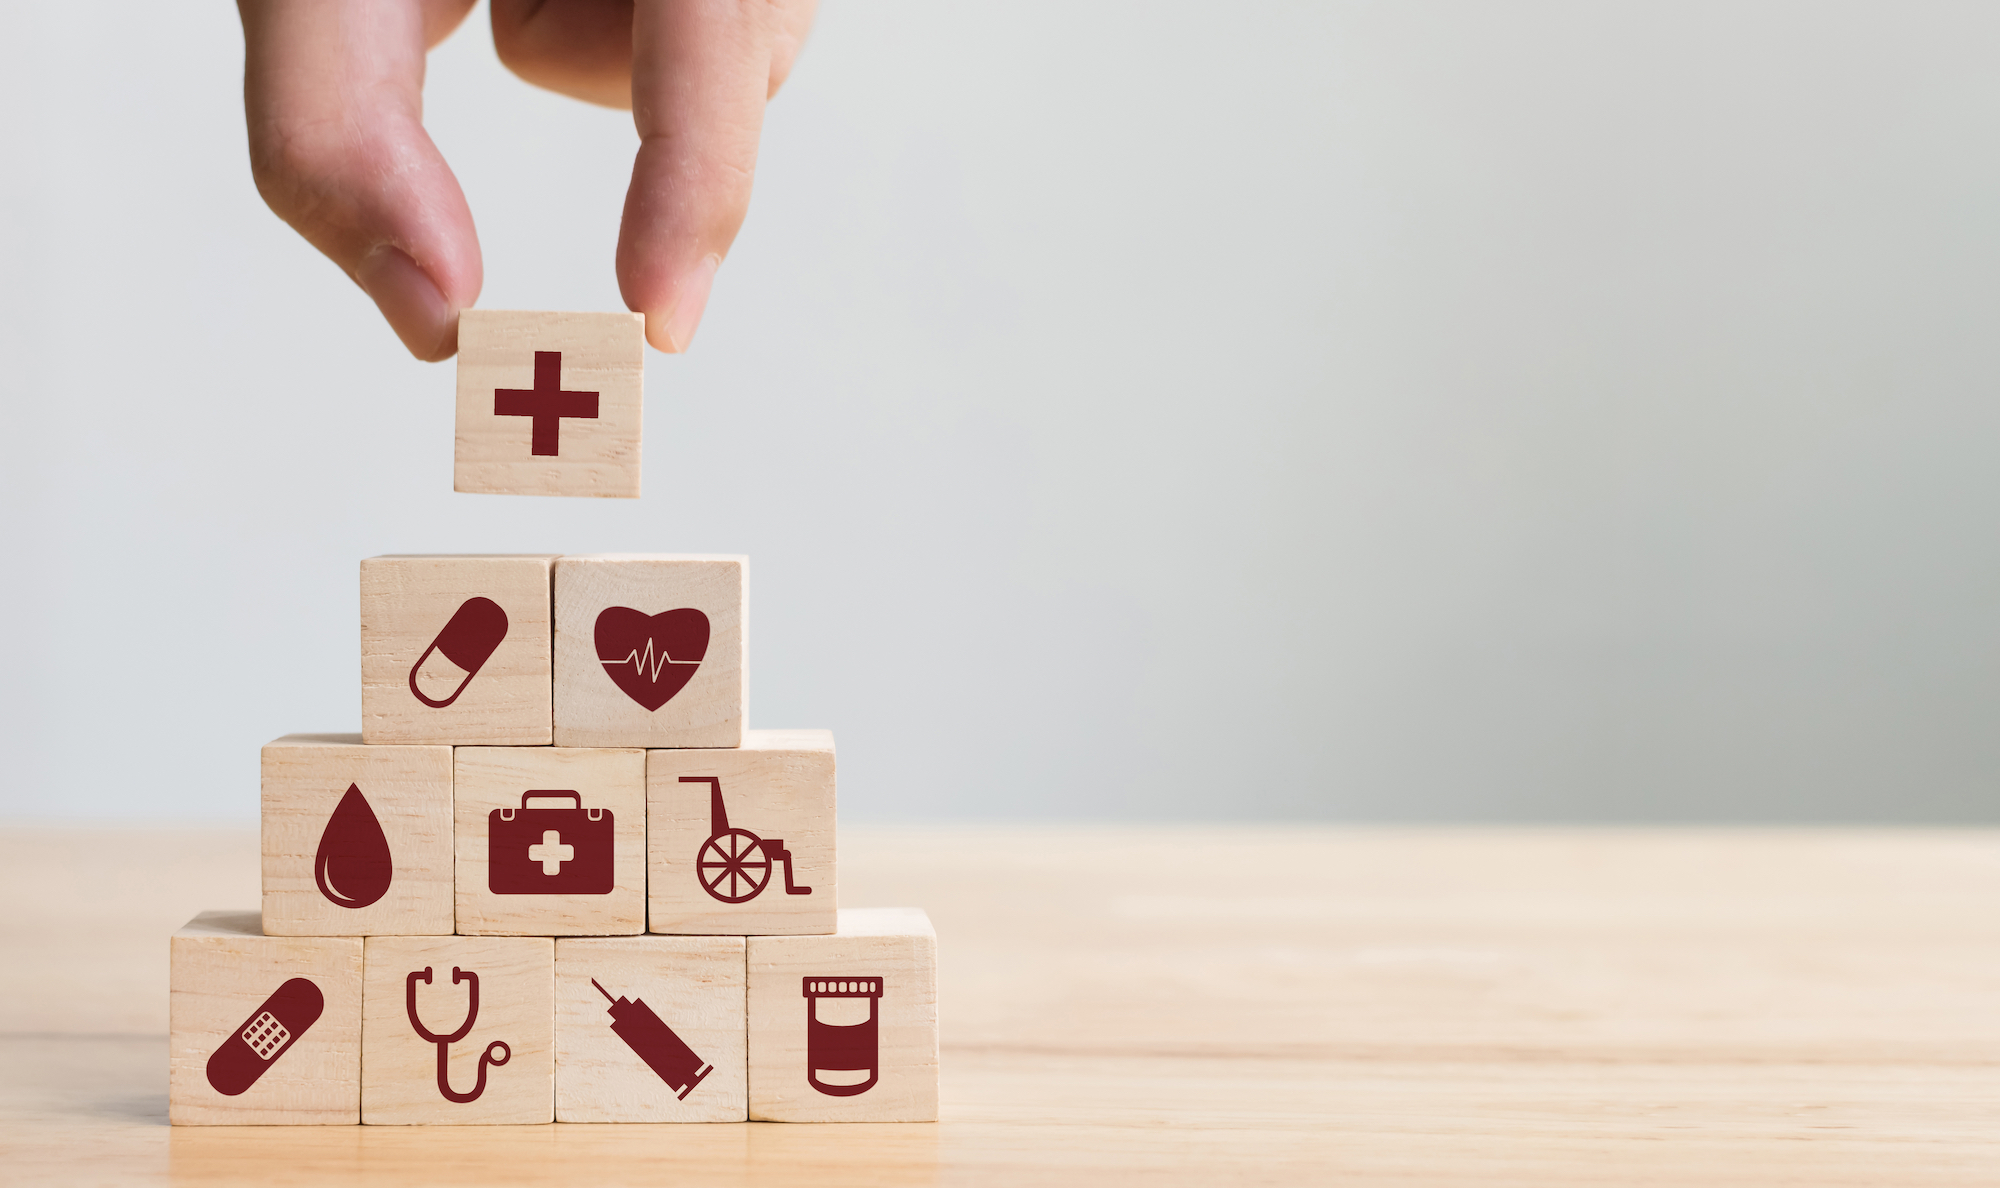 A stack of blocks with healthcare symbols on them is pictured.